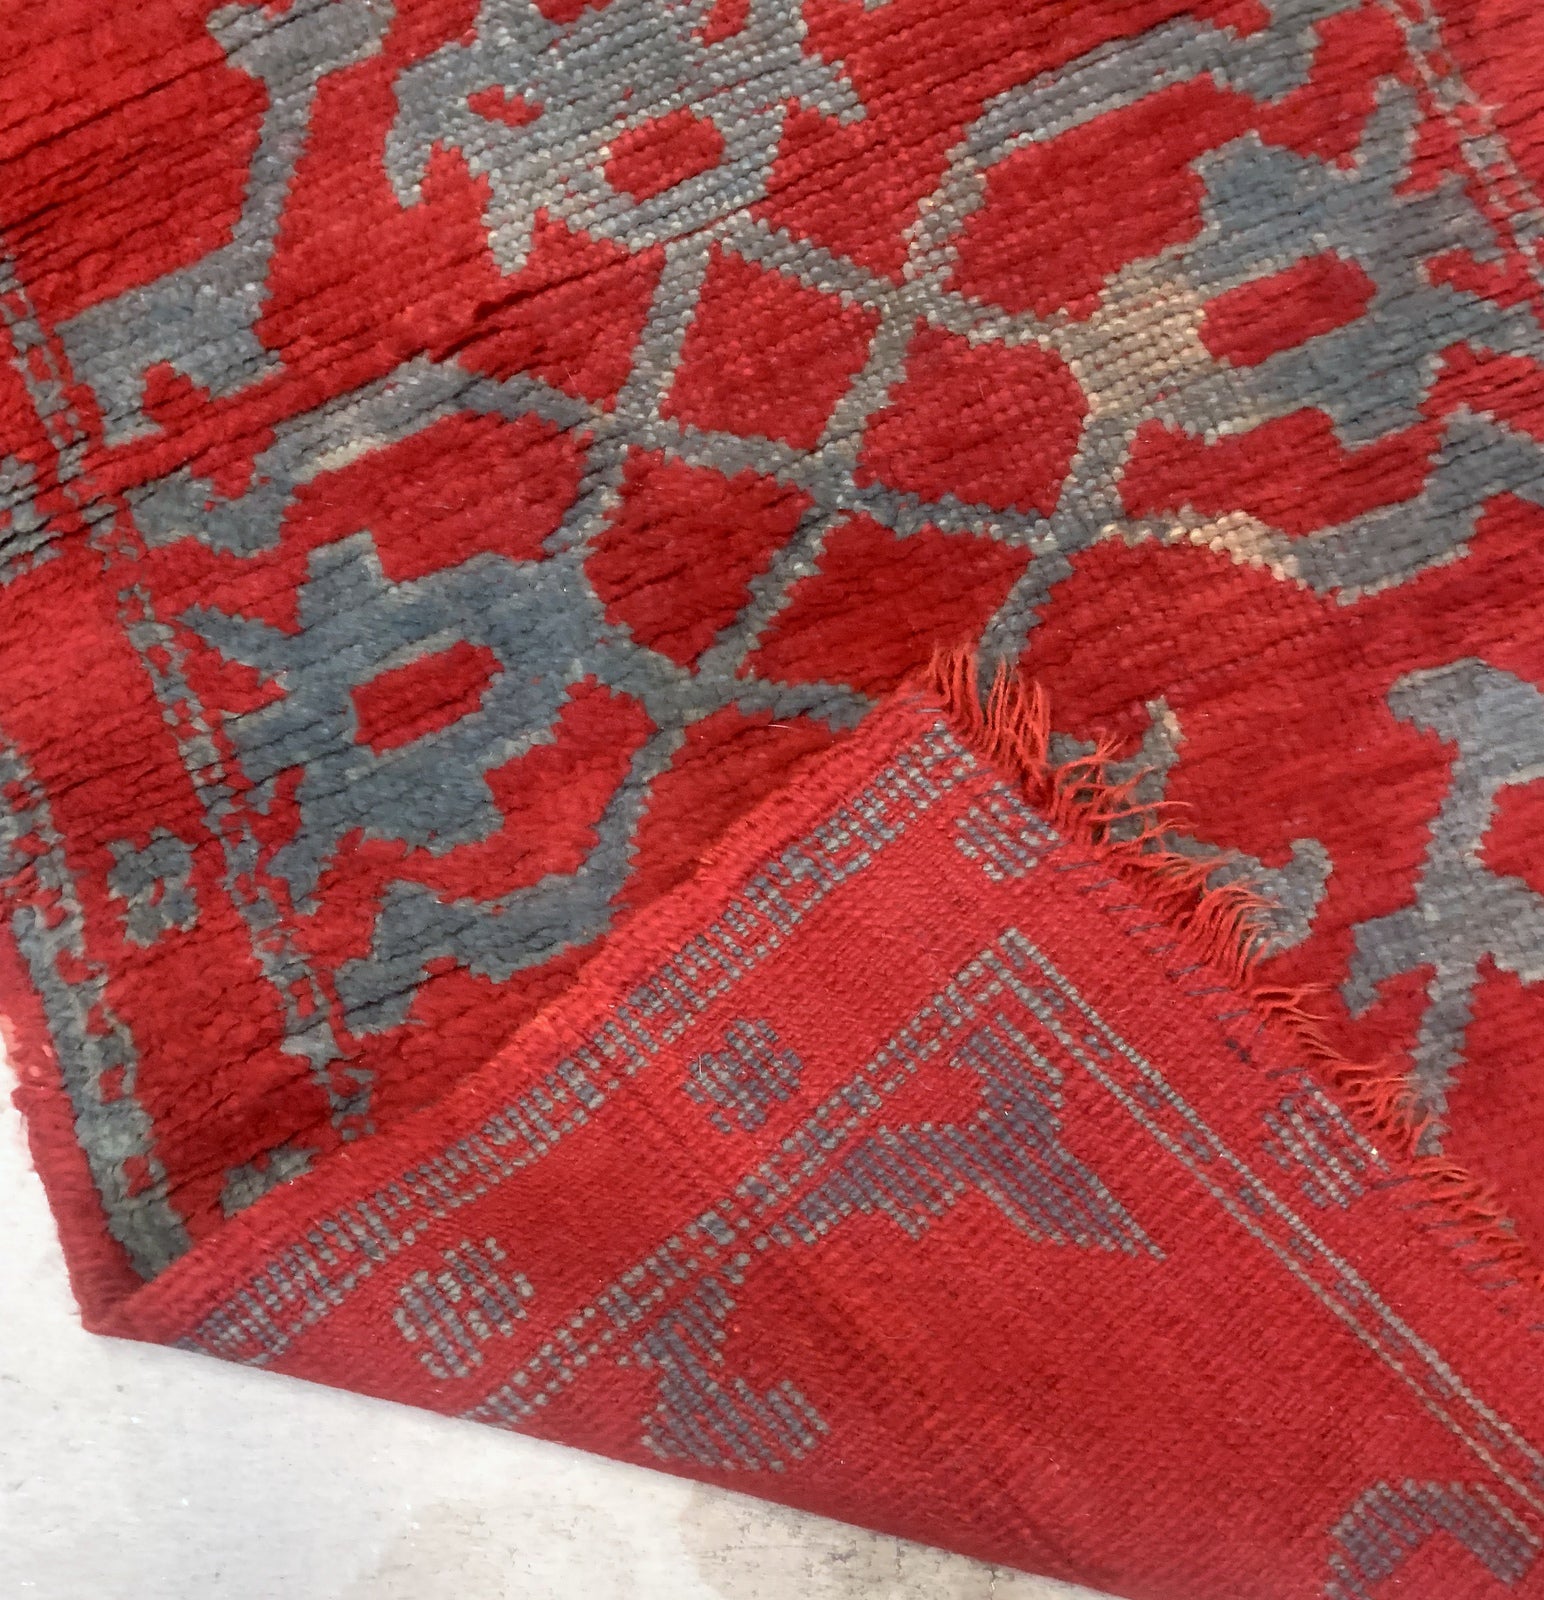 Handmade antique Turkish red rug from Oushak region. The rug is from the end of 19th century in original condition, it has some signs of age.